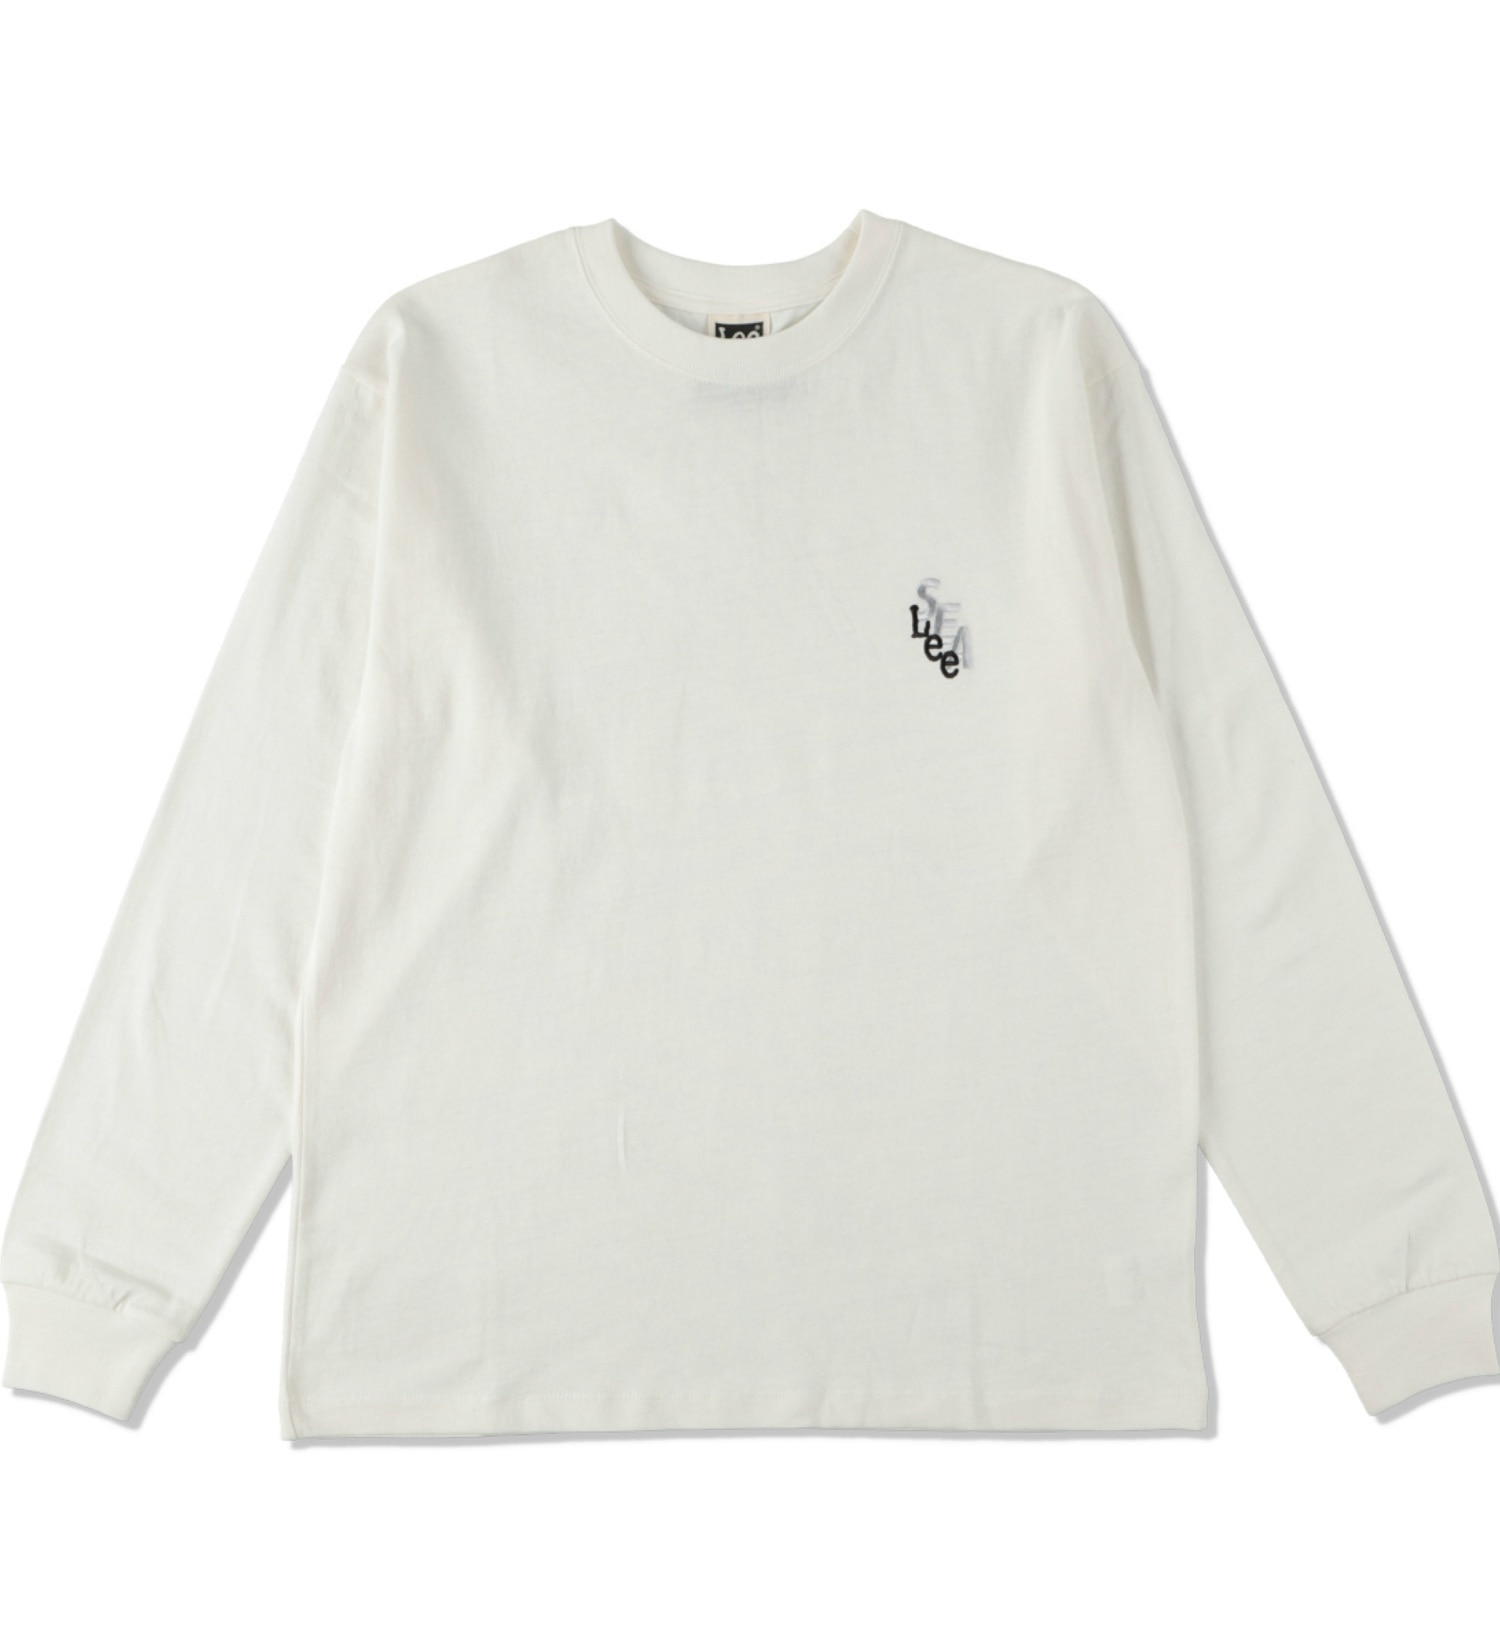 WIND AND SEA L/S TEE WHITE ロンT